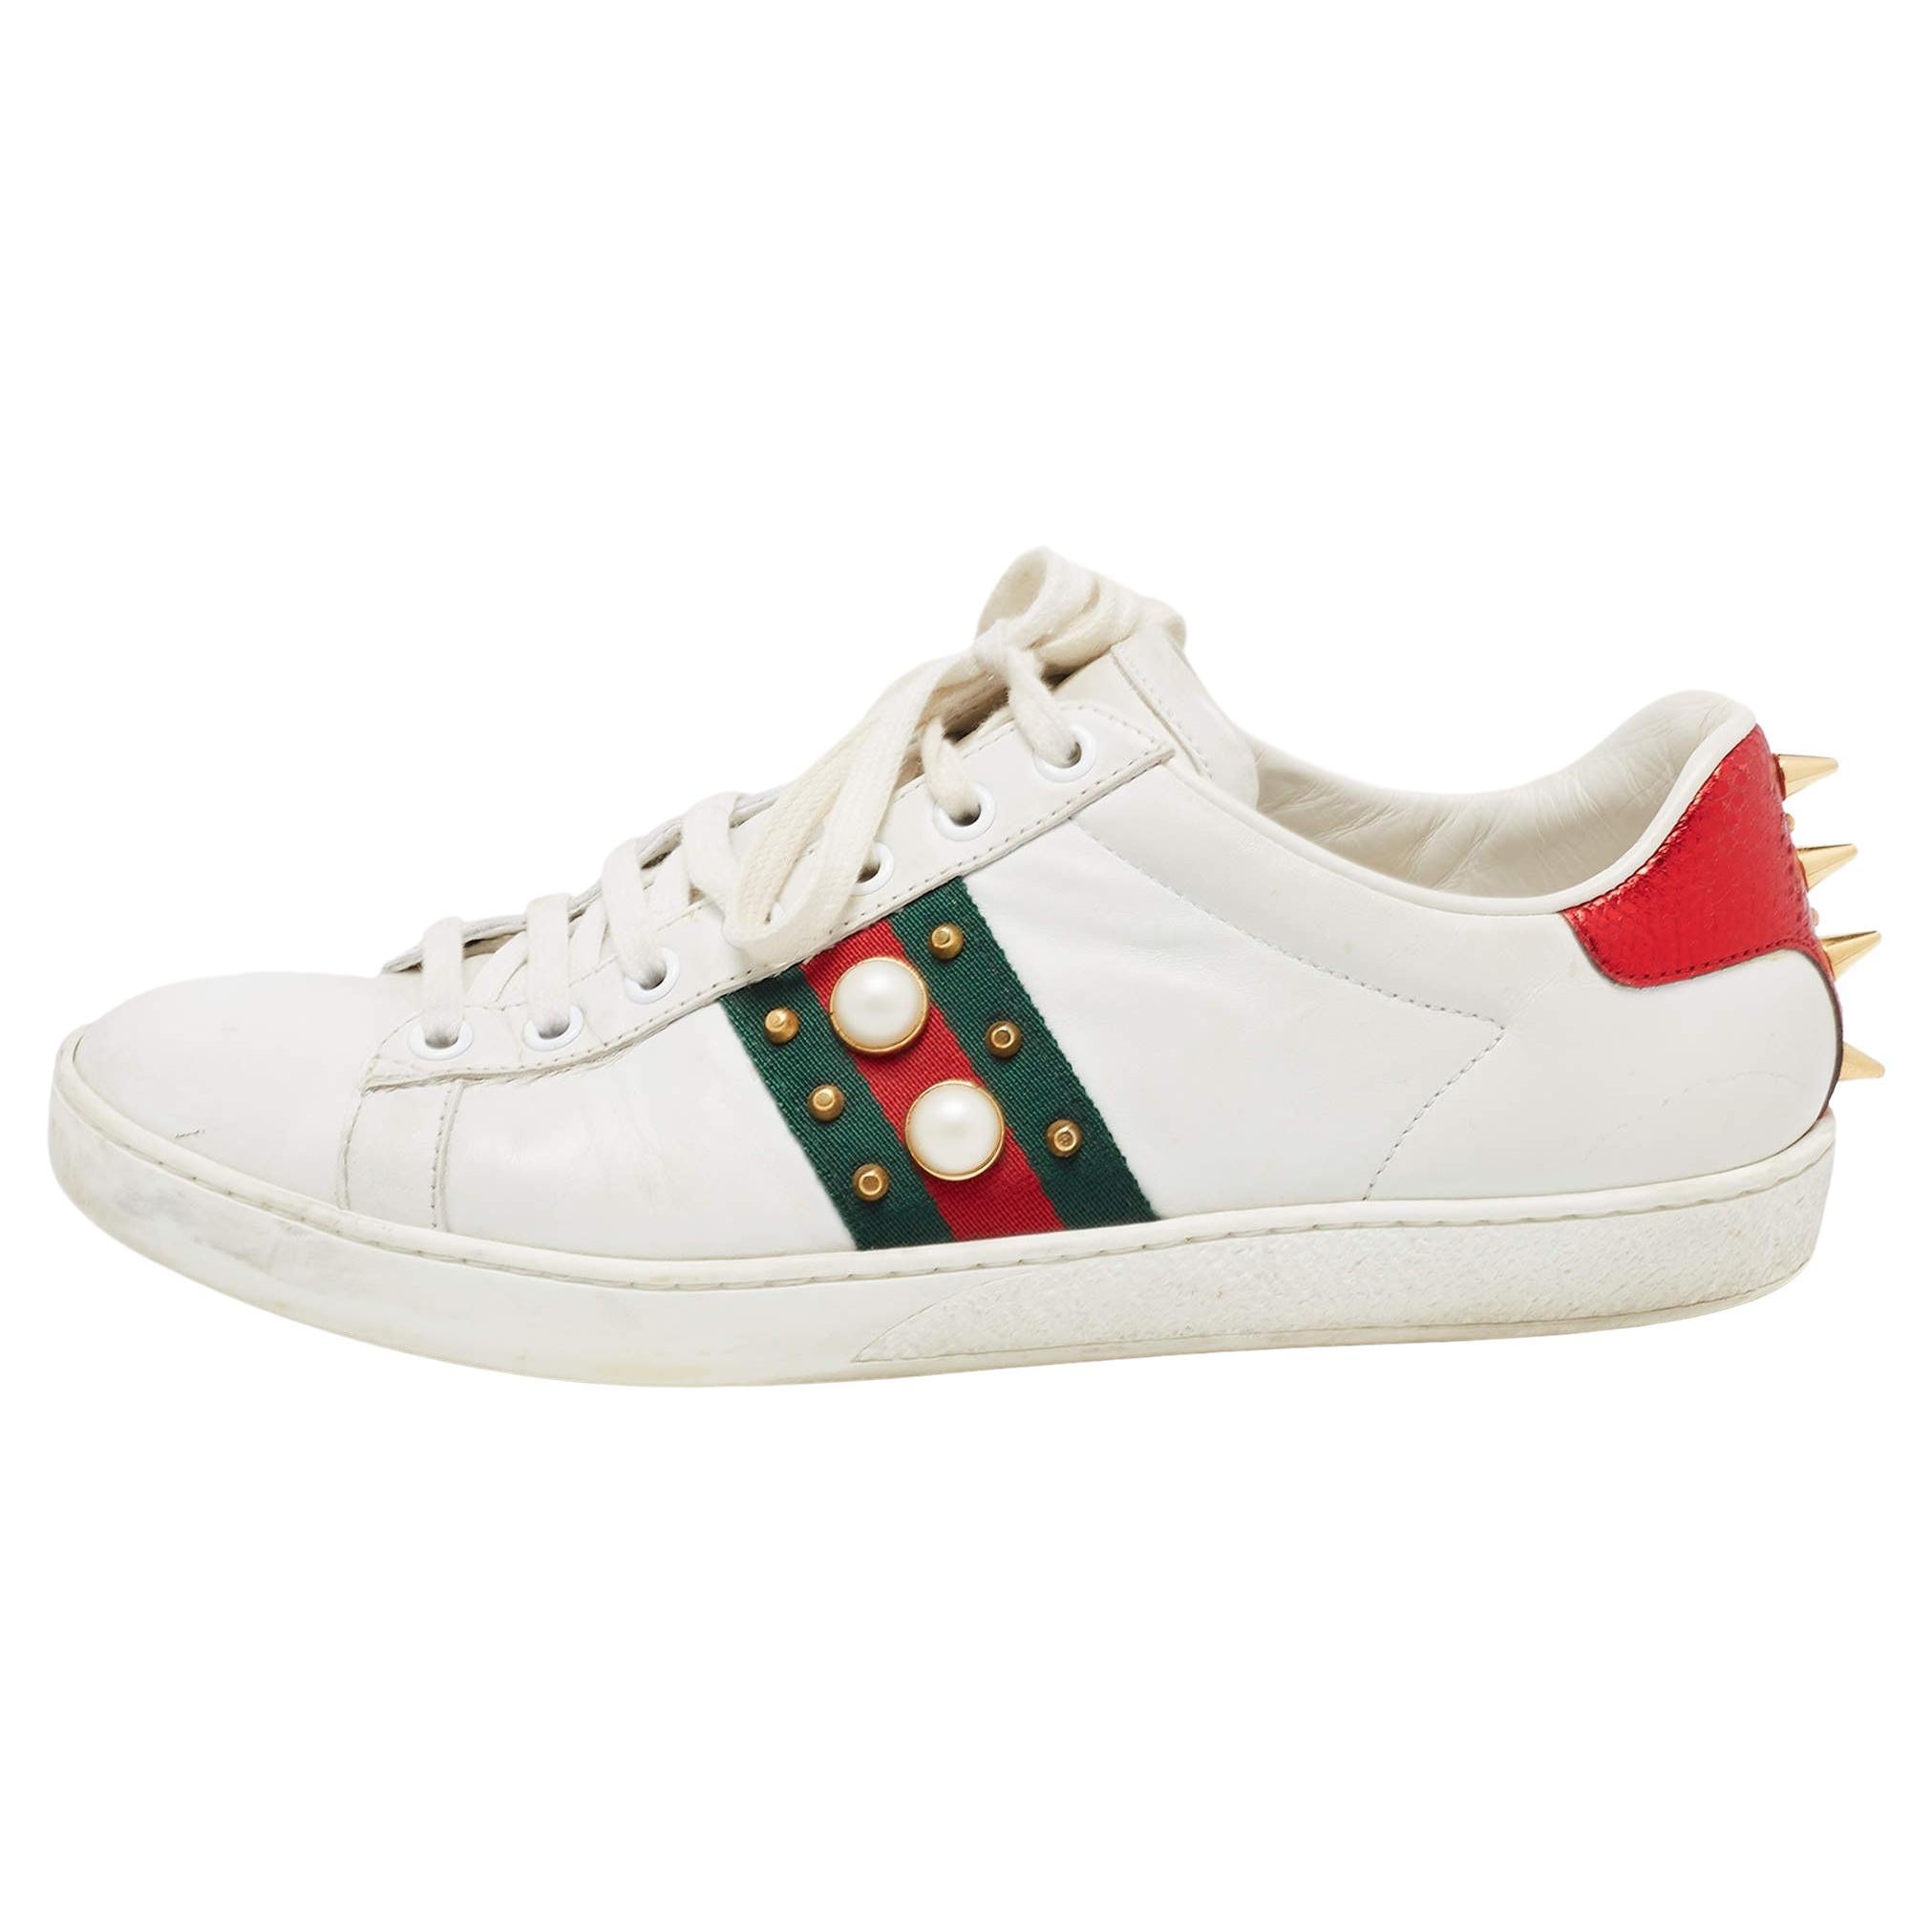 Gucci White Leather Faux Pearl and Spike Embellished Ace Sneakers Size 38.5